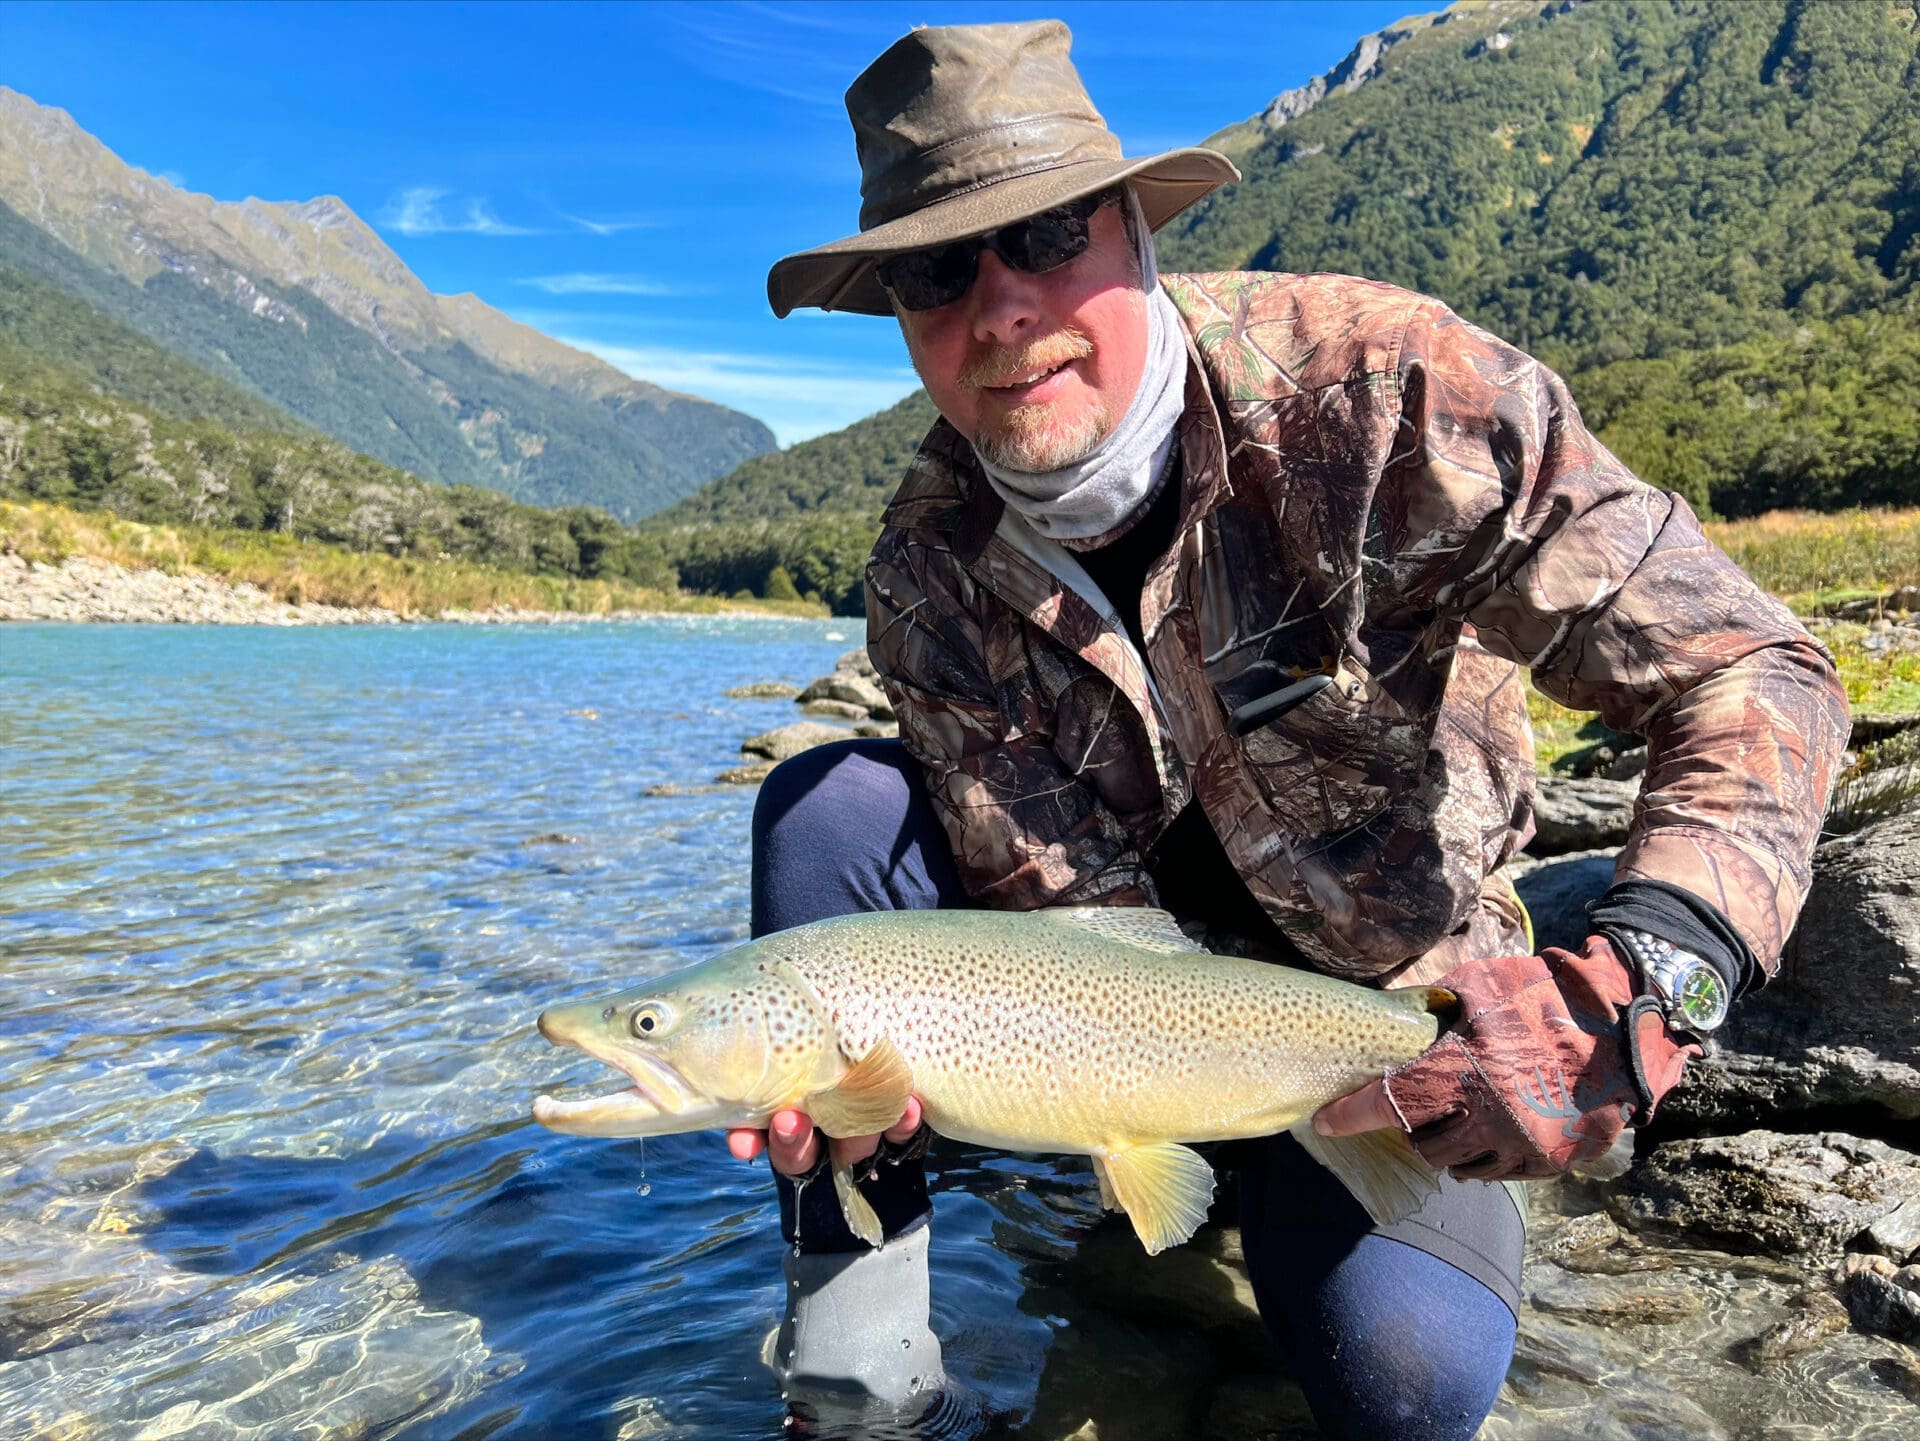 Fly fishing in New Zealand with the Seiko Alpinist